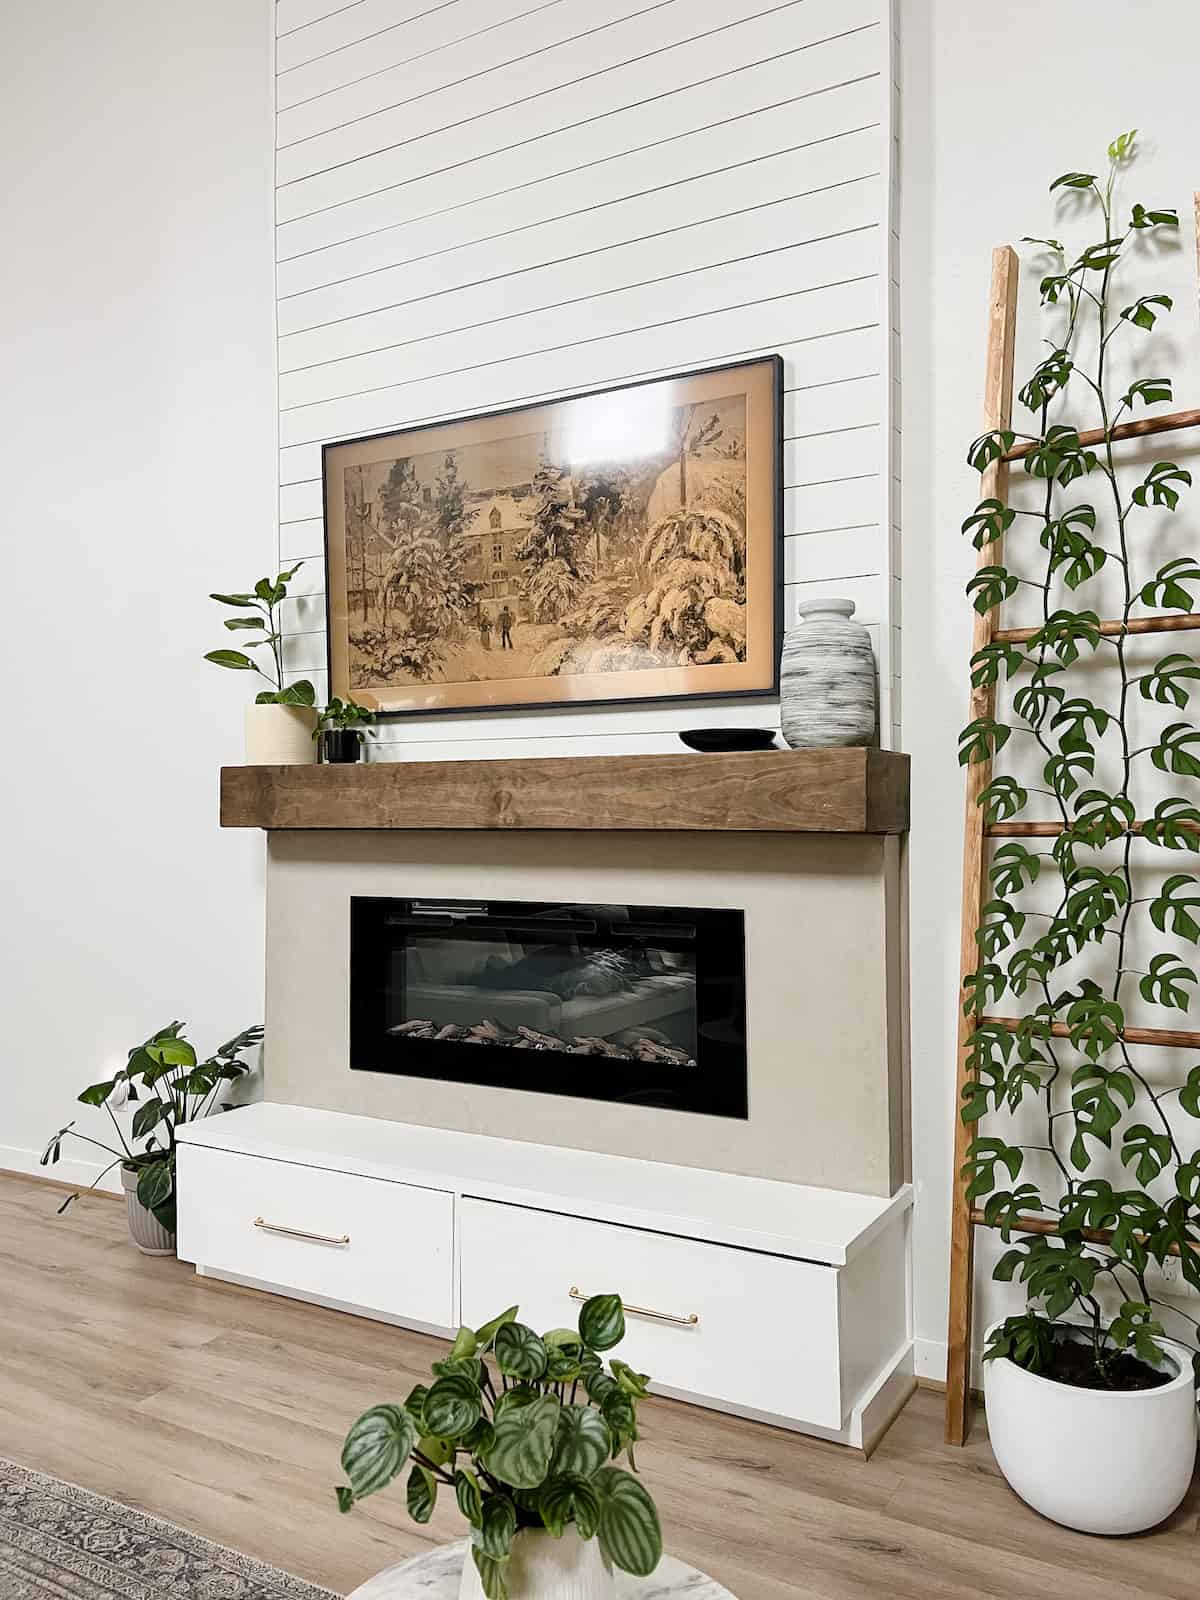 DIY electric fireplace with shiplap and roman clay